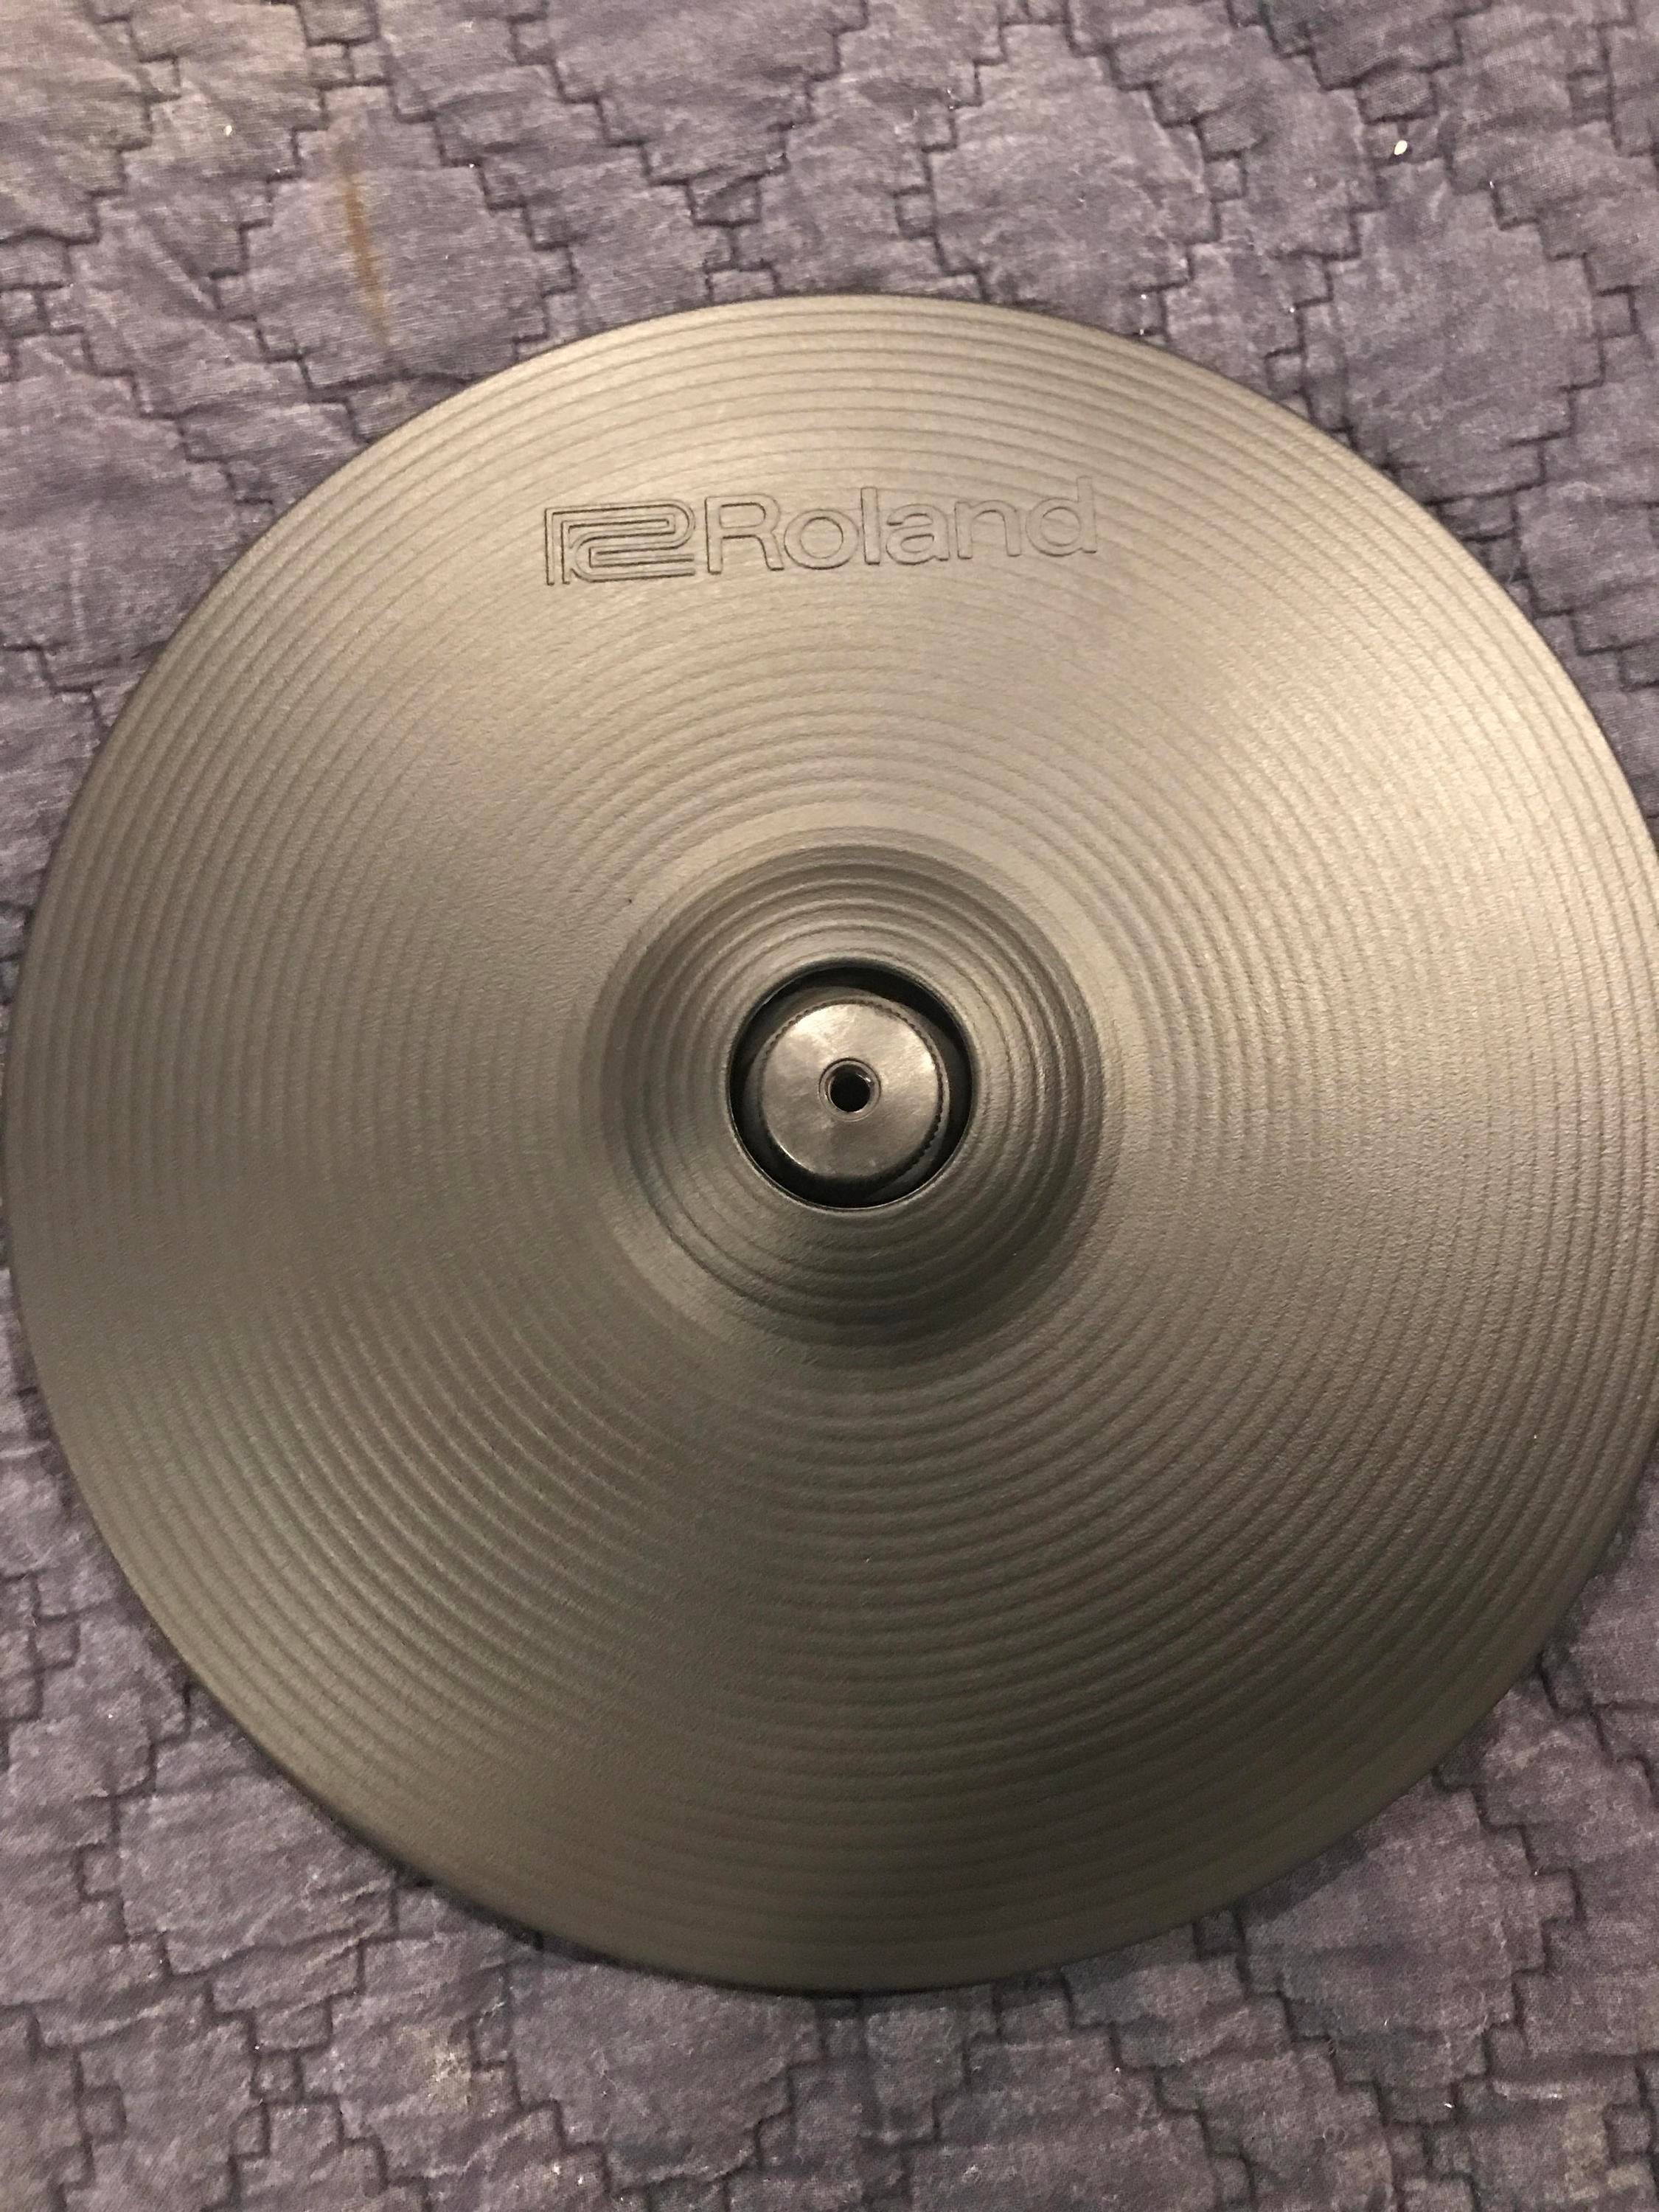 Used Roland V-Cymbal CY-13R-BK Electronic Ride Cymbal Controller